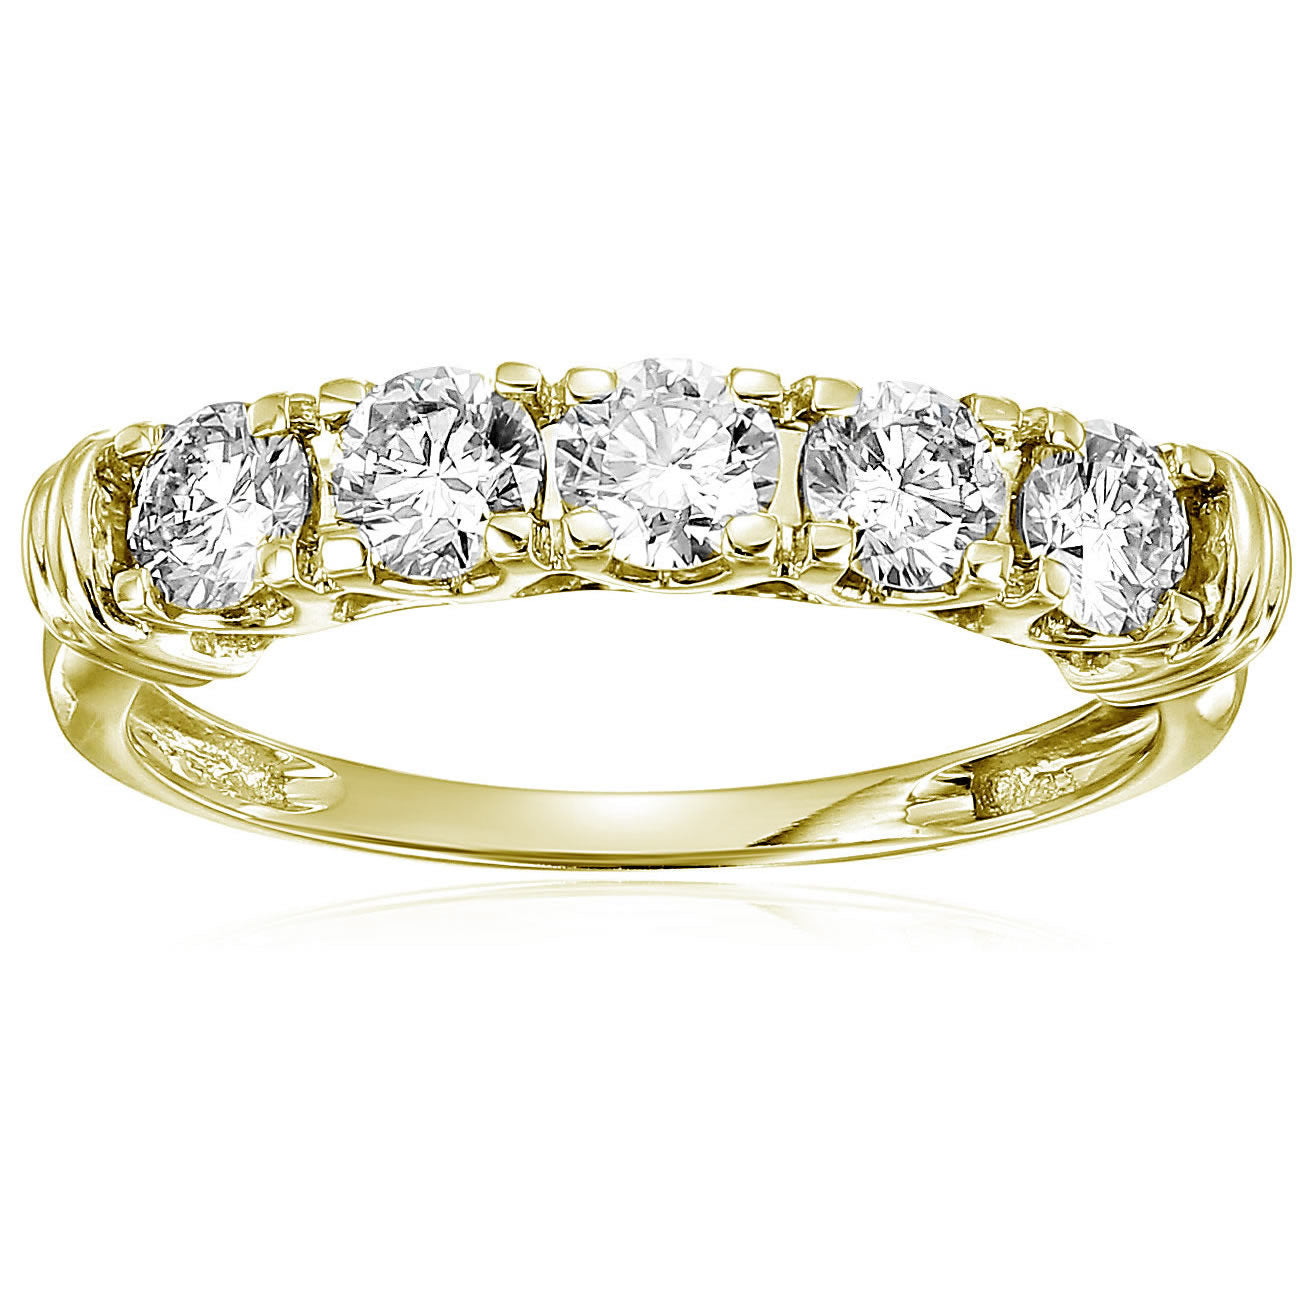 1 cttw Certified I1-I2 5 Stone Diamond Ring 14K Yellow Gold Engagement